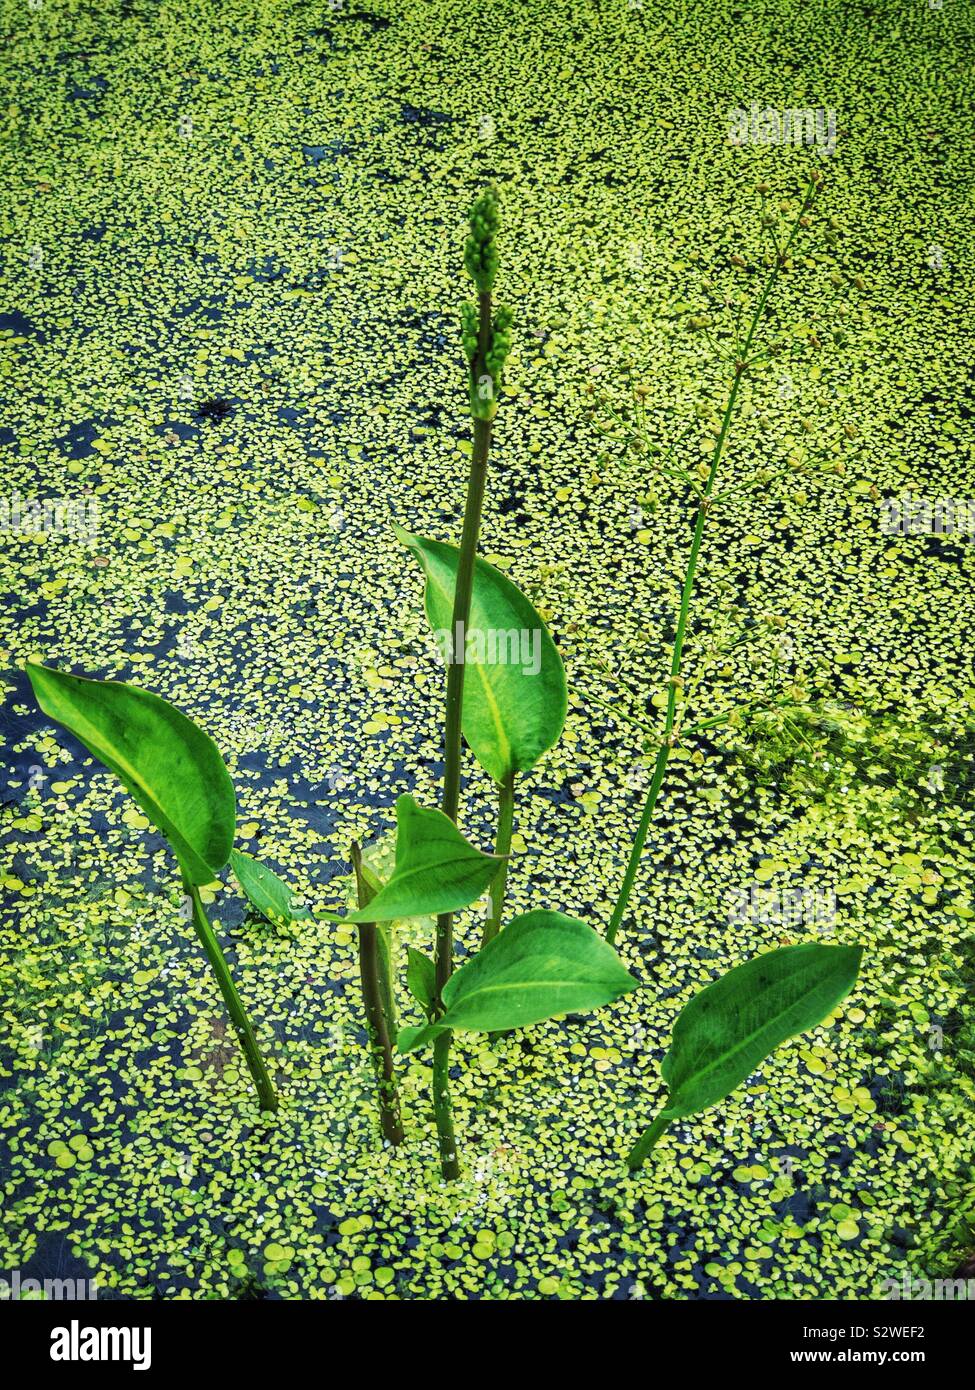 Aquatic plant and pond weed. Stock Photo